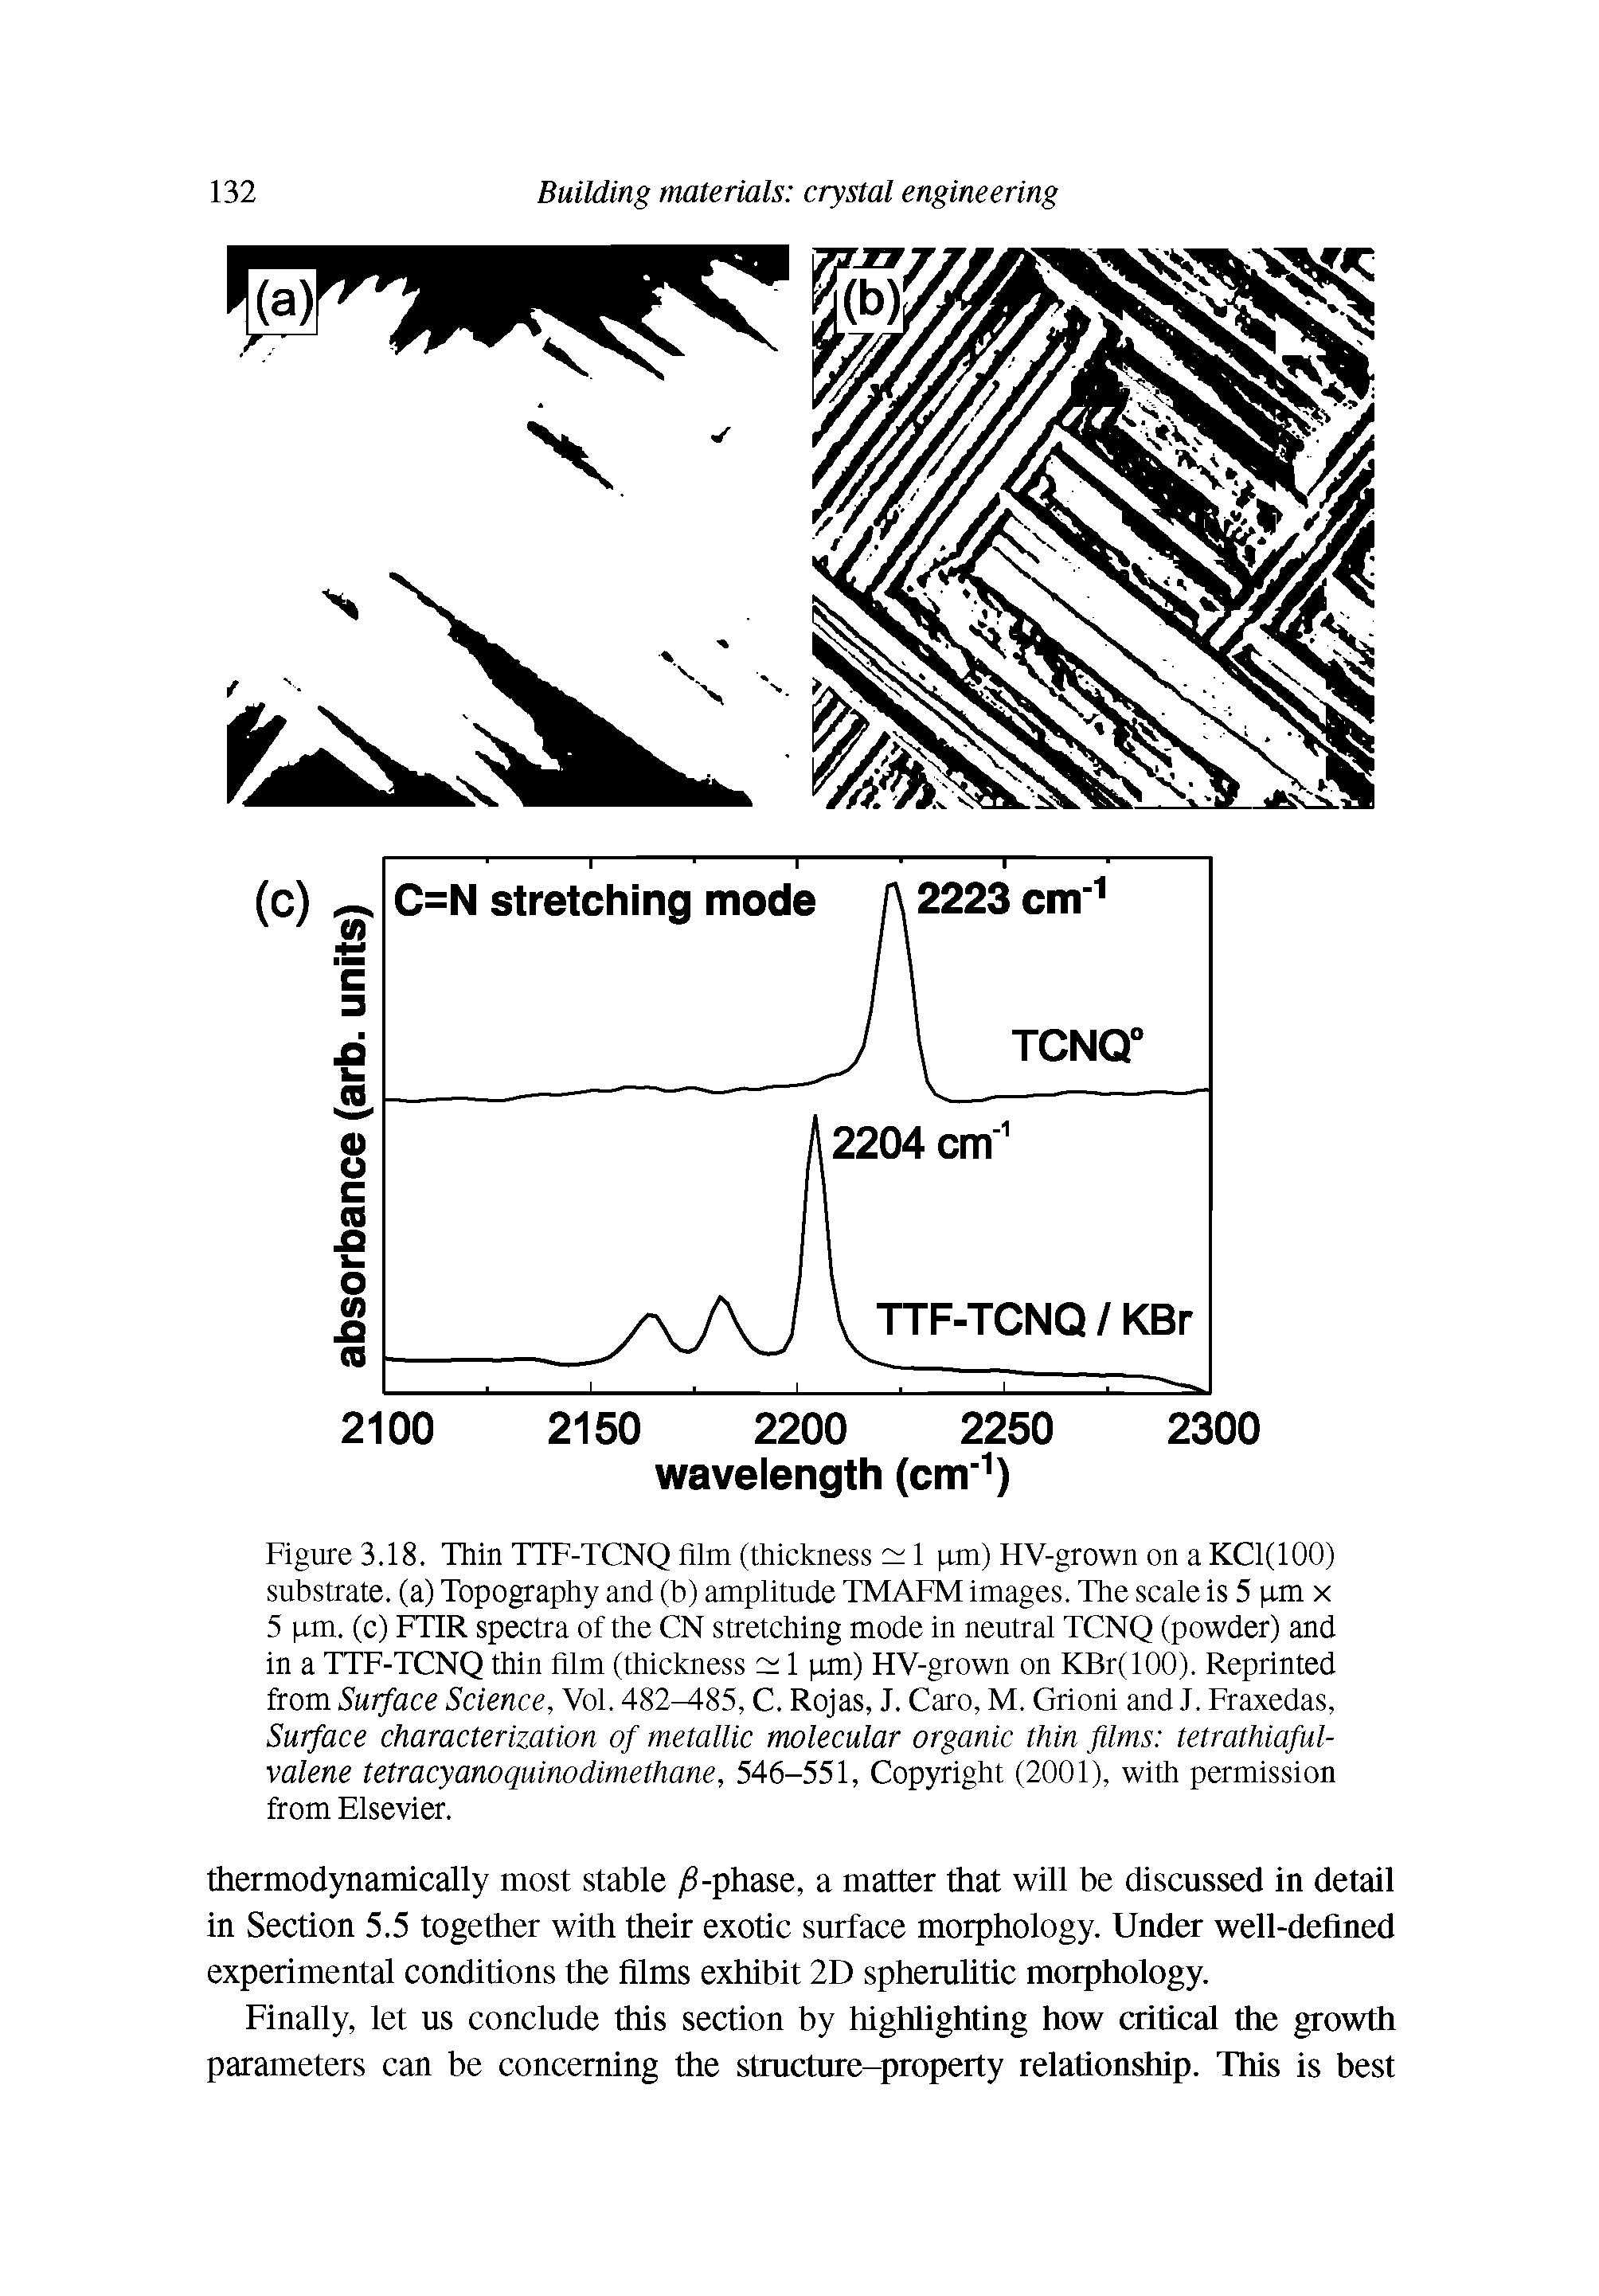 Figure 3.18. Thin TTF-TCNQ film (thickness 1 um) HV-grown on a KCl(lOO) substrate, (a) Topography and (b) amplitude TMAFM images. The scale is 5 p.m x 5 ]xm. (c) FTIR spectra of the CN stretching mode in neutral TCNQ (powder) and in a TTF-TCNQ thin film (thickness 1 um) HV-grown on KBr(lOO). Reprinted from Surface Science, Vol. 482 85, C. Rojas, J. Caro, M. Grioni and J. Fraxedas, Surface characterization of metallic molecular organic thin films tetrathiaful-valene tetracyanoquinodimethane, 546-551, Copyright (2001), with permission from Elsevier.